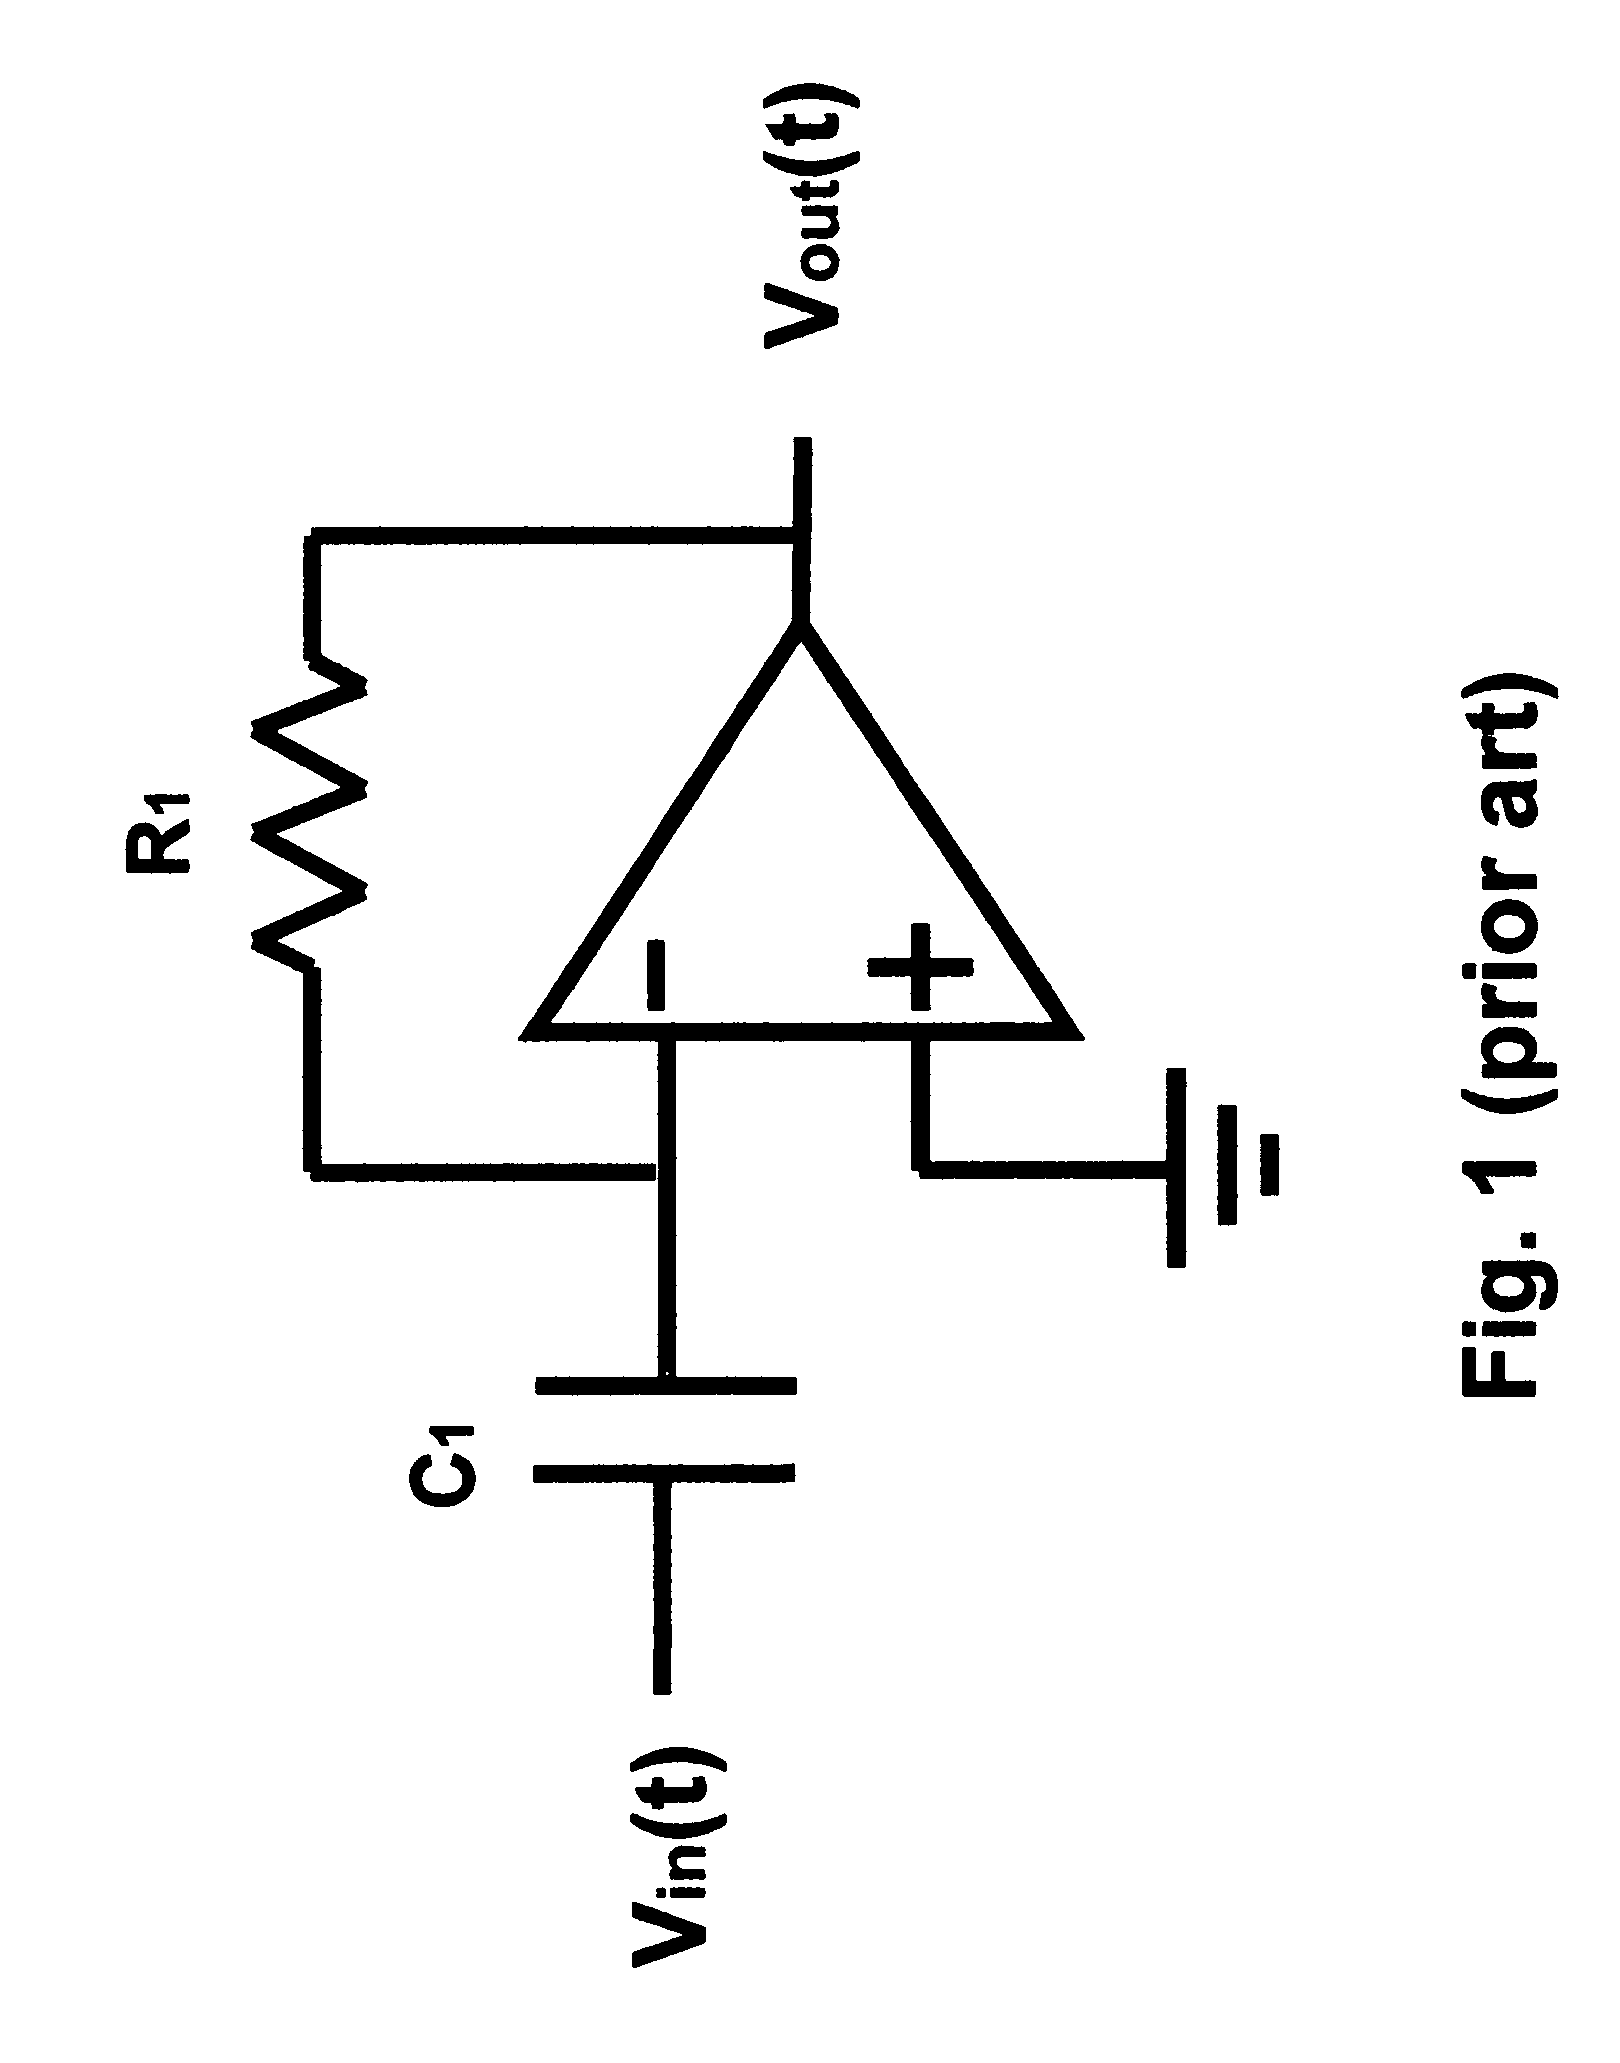 Operational amplifier with resistance switch crossbar feedback